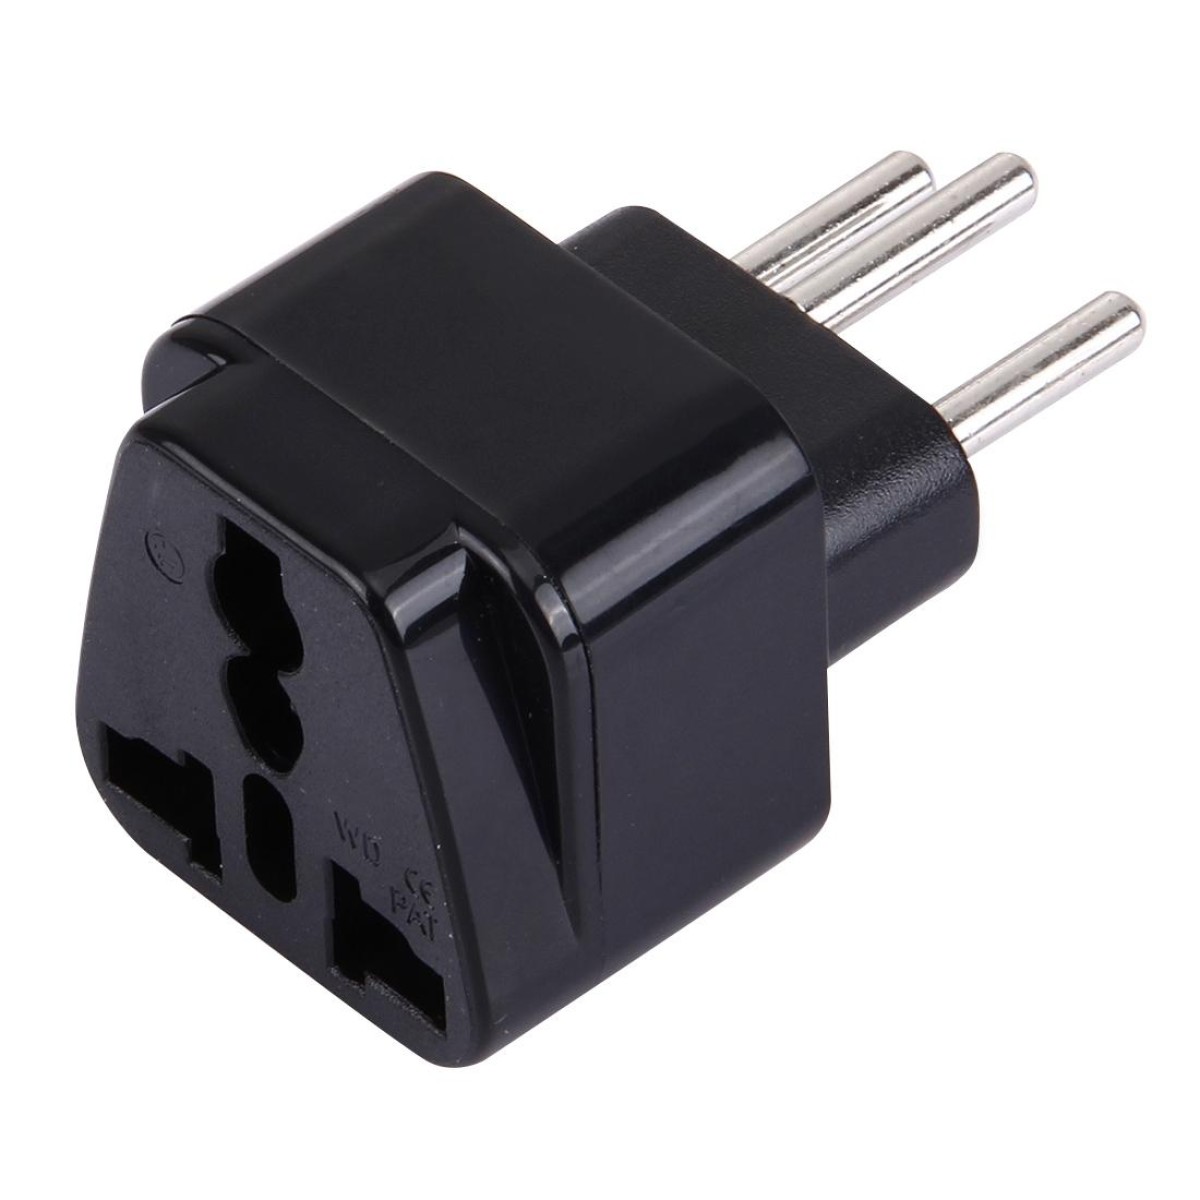 WD-11A Portable Universal Plug to Switzerland (Grounded Type-J) Plug Adapter Power Socket Travel Converter